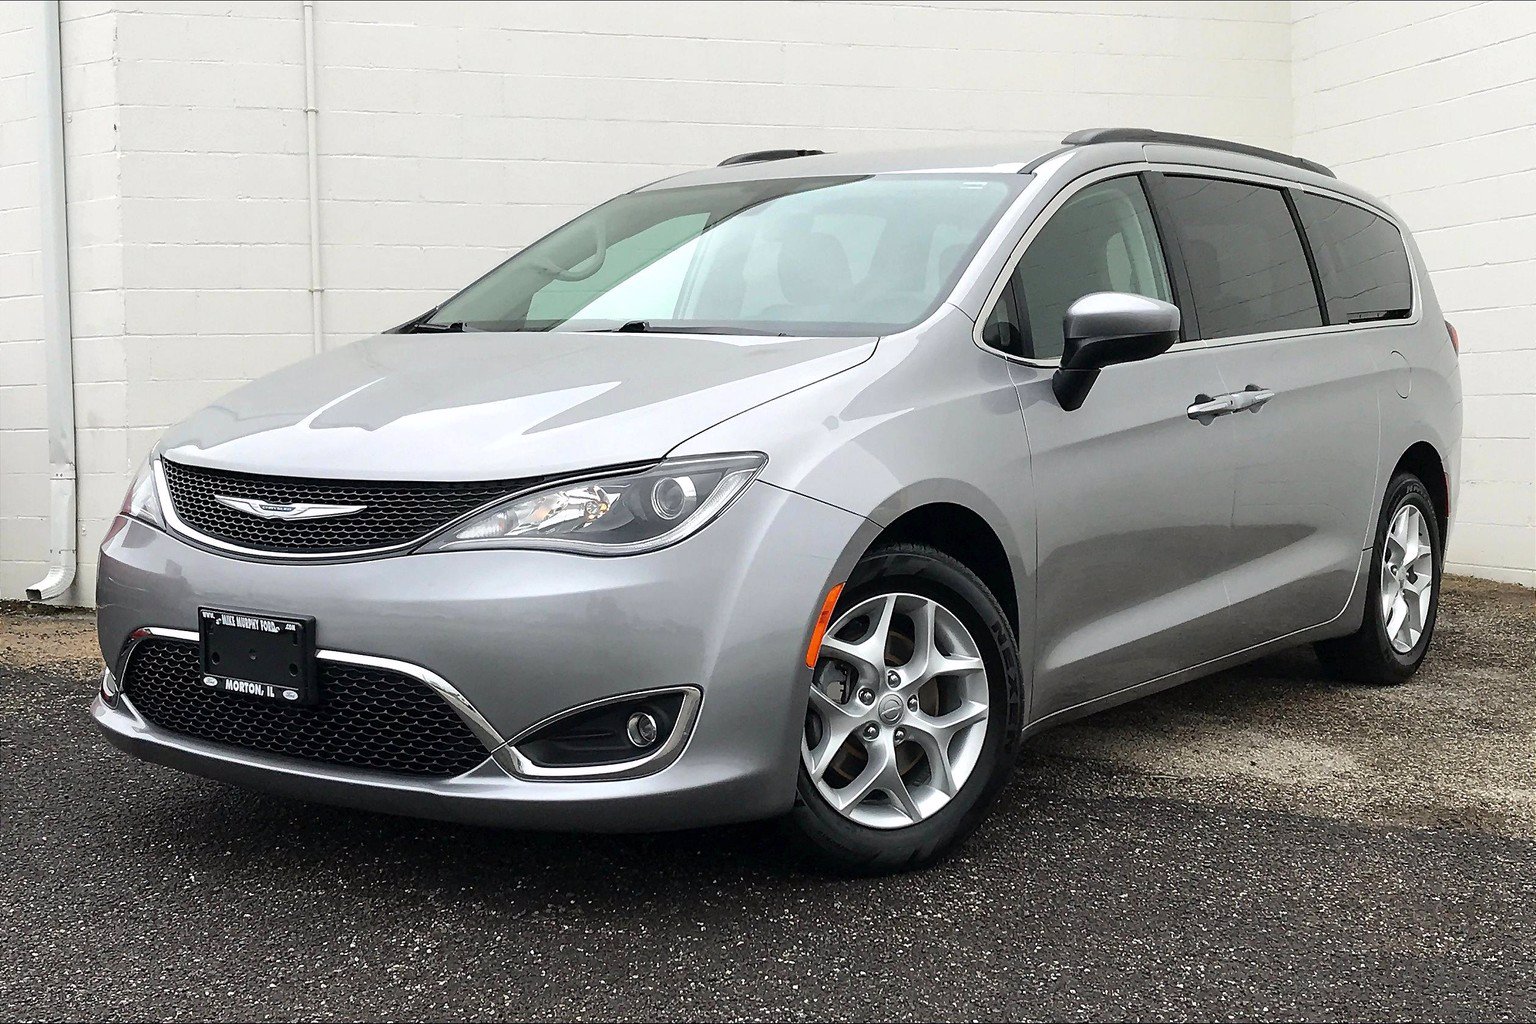 PreOwned 2017 Chrysler Pacifica Touring Plus FWD 4D